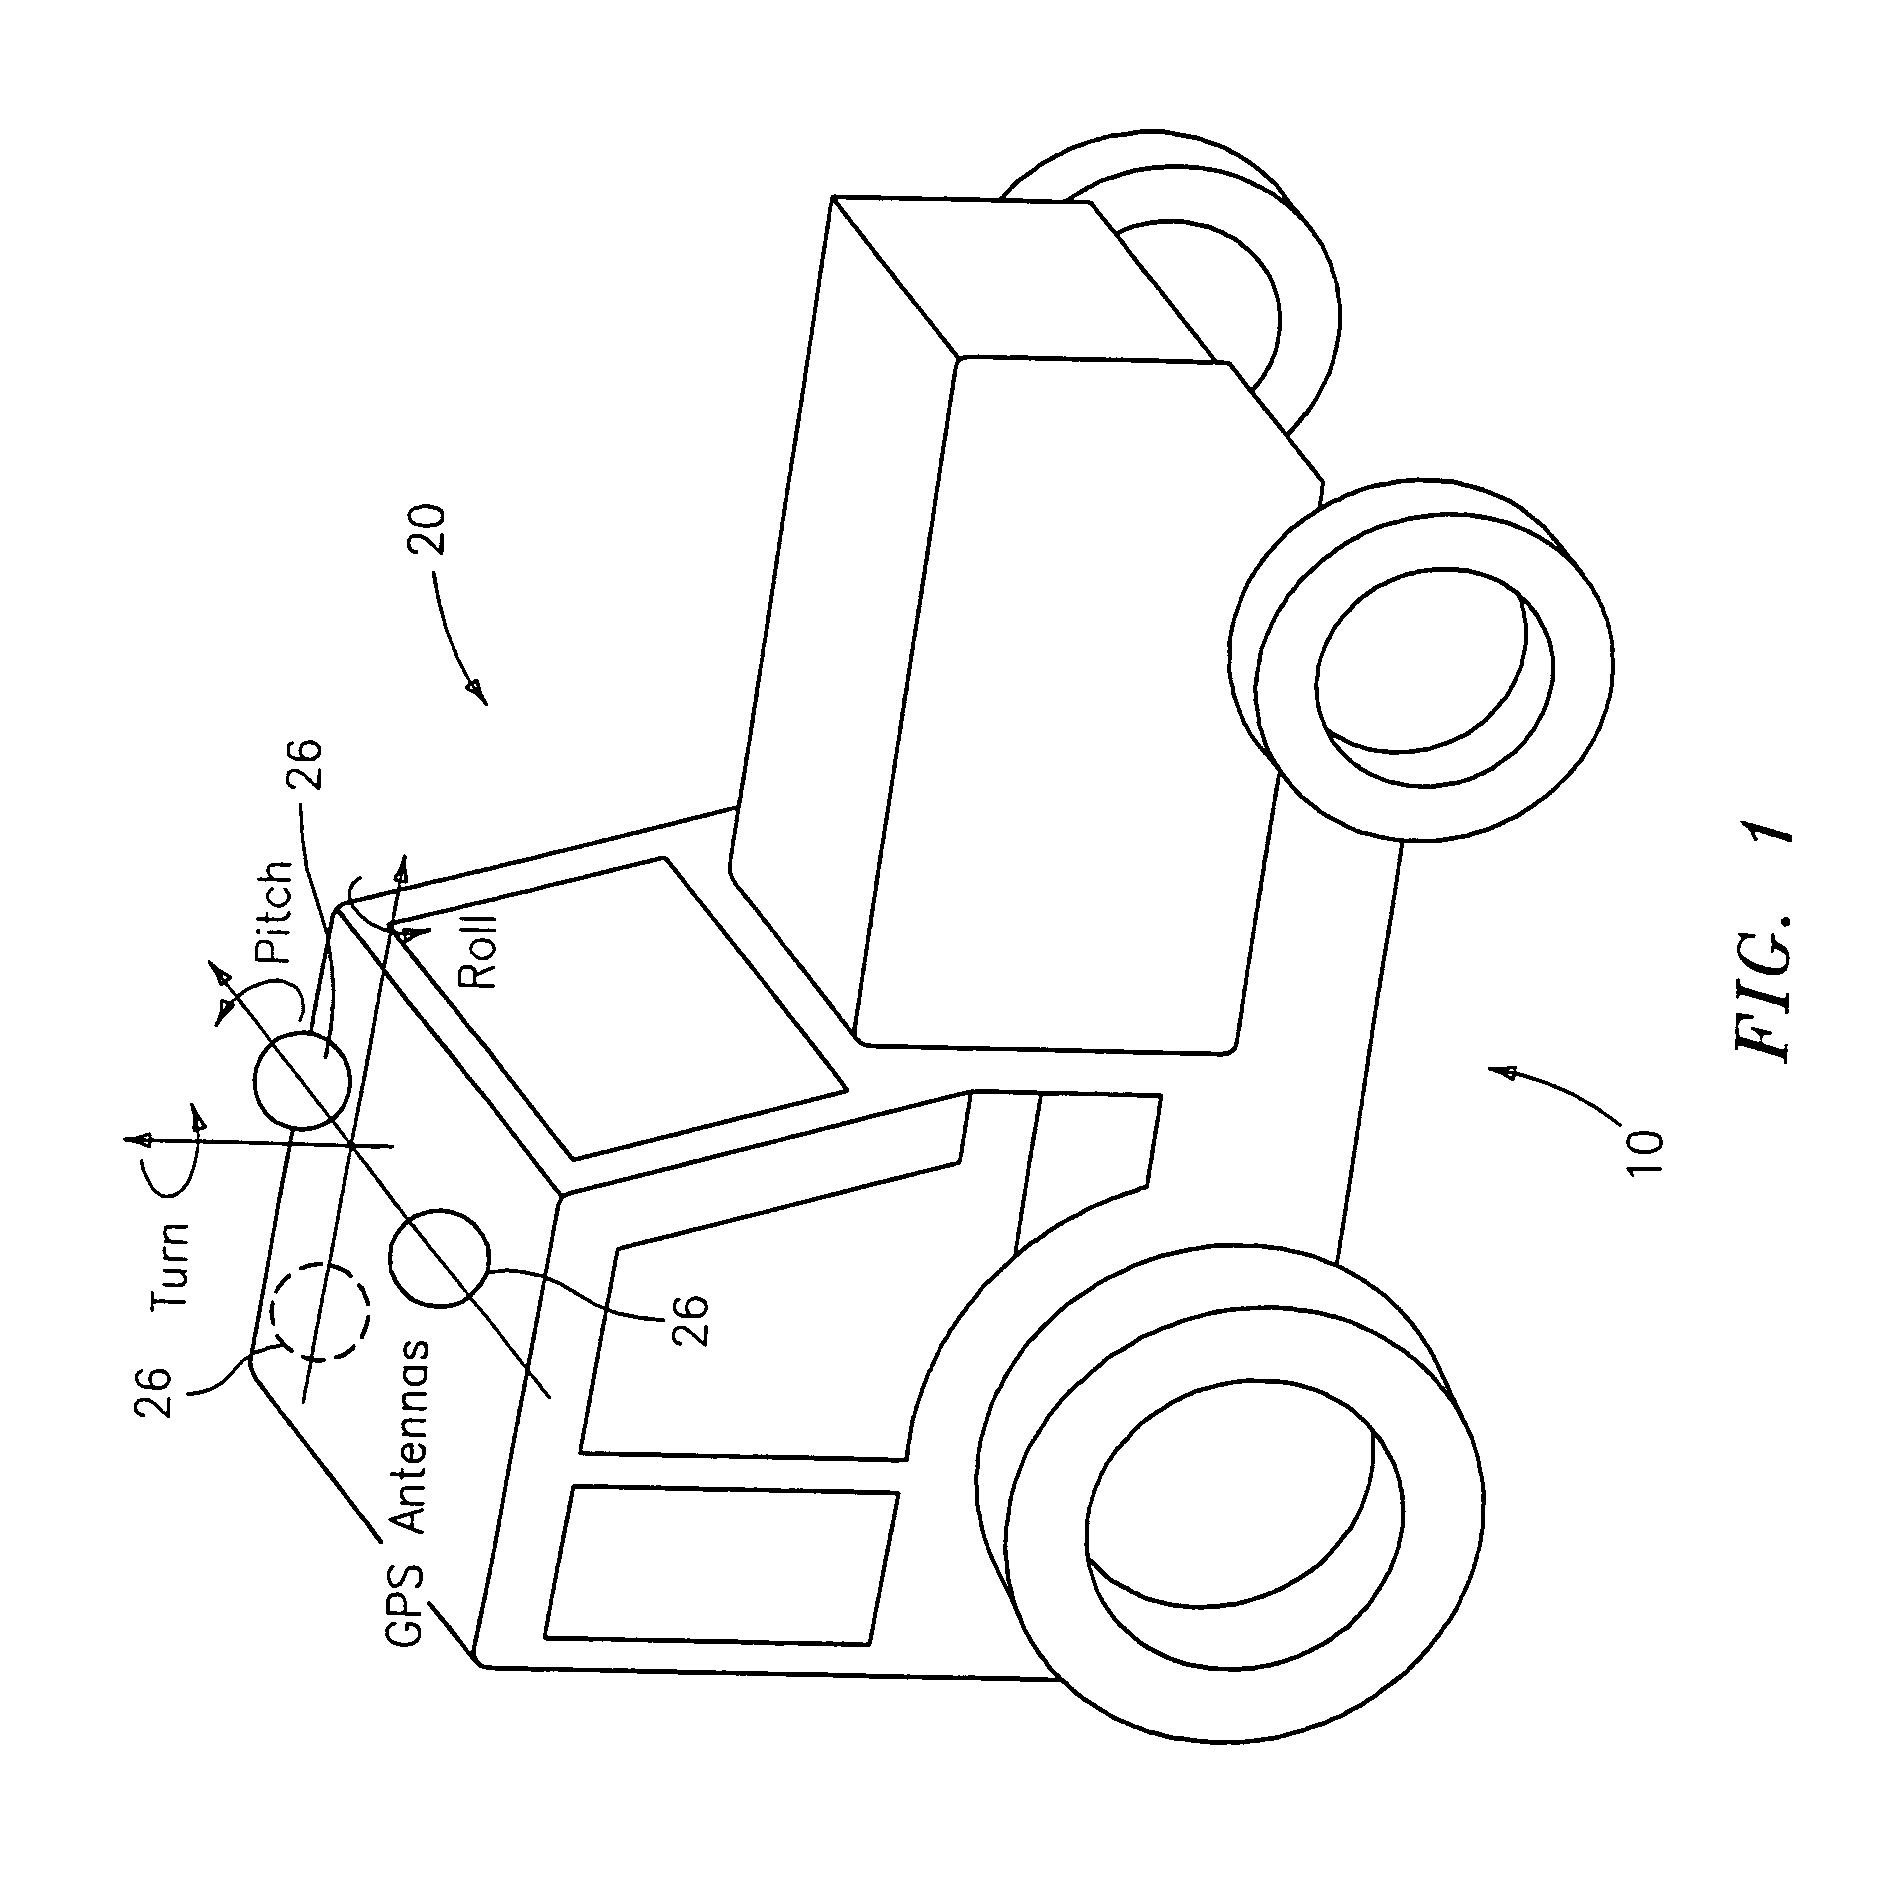 Satellite position and heading sensor for vehicle steering control